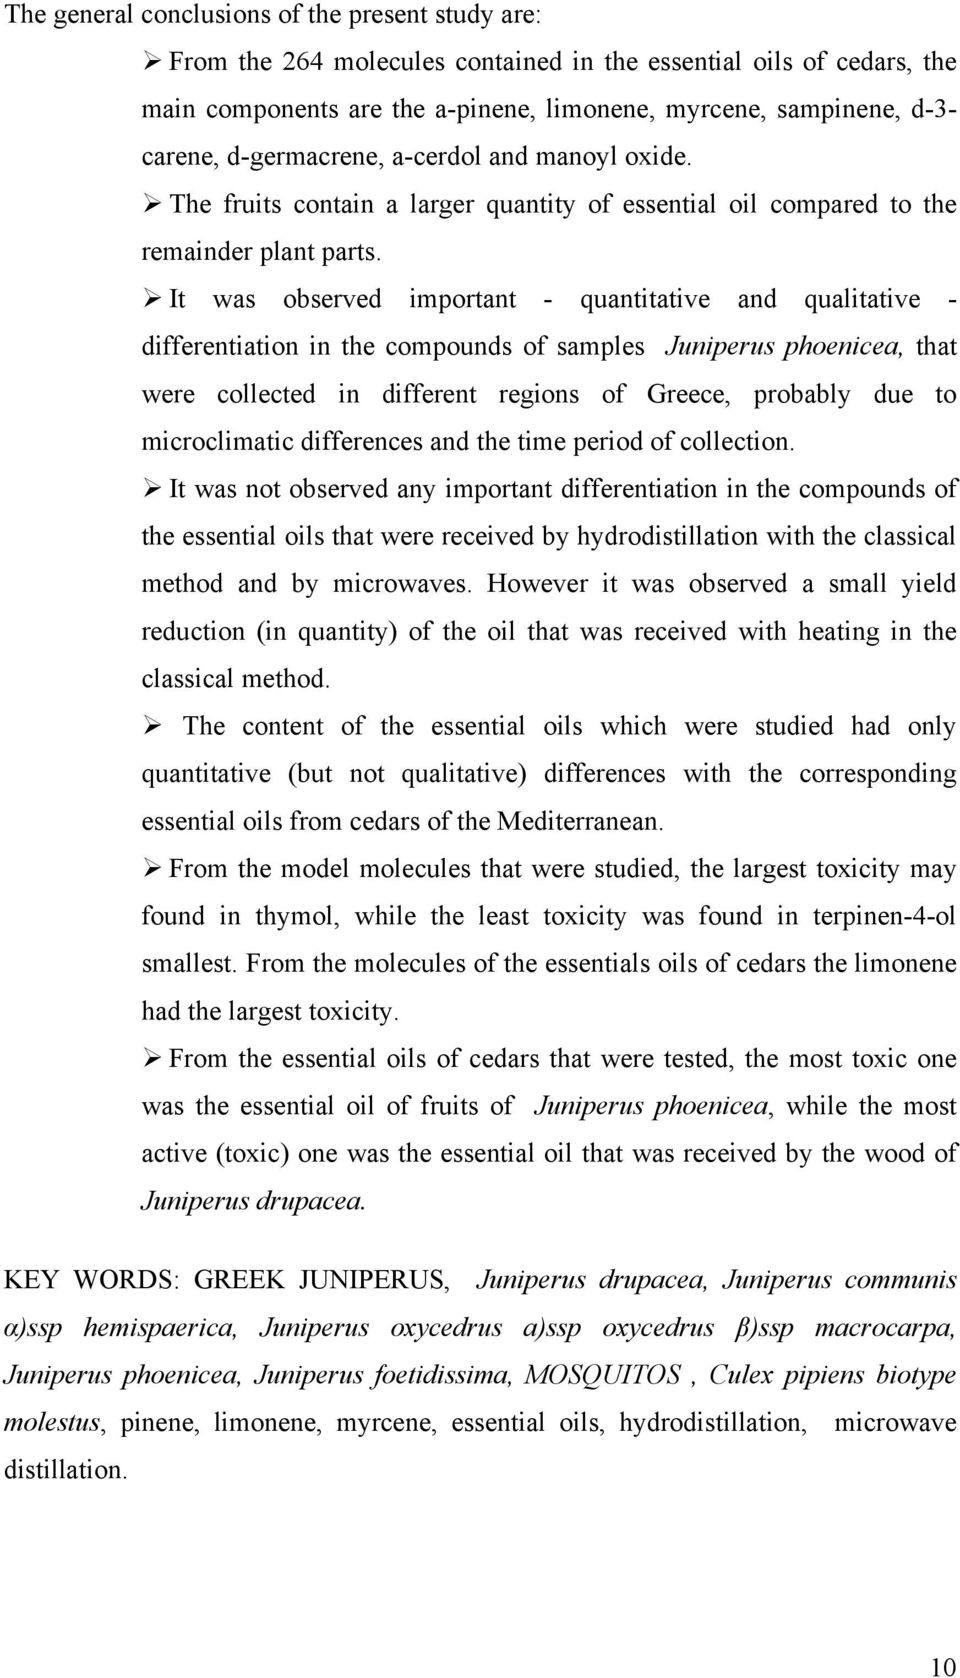 It was observed important - quantitative and qualitative - differentiation in the compounds of samples Juniperus phoenicea, that were collected in different regions of Greece, probably due to